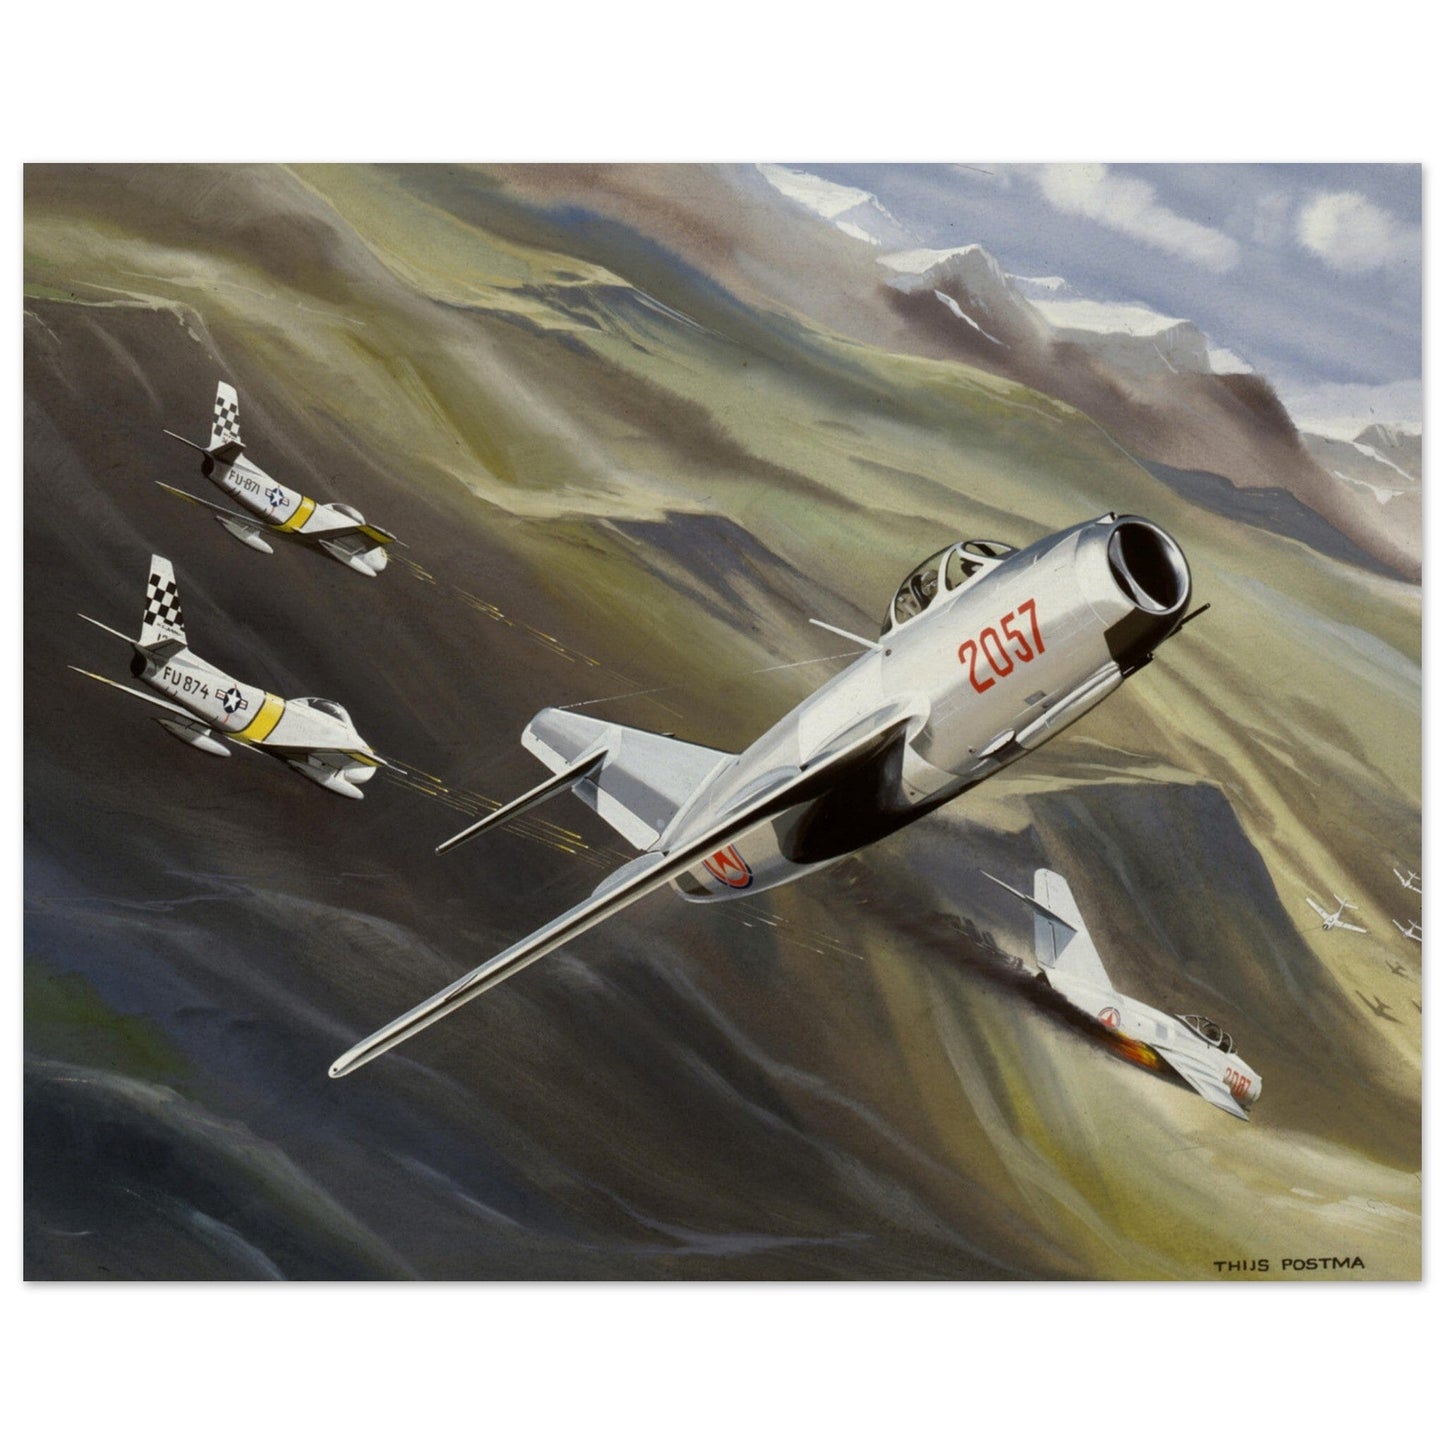 Thijs Postma - Poster - MiG-15 And F-86 Sabre In Korea Poster Only TP Aviation Art 40x50 cm / 16x20″ 